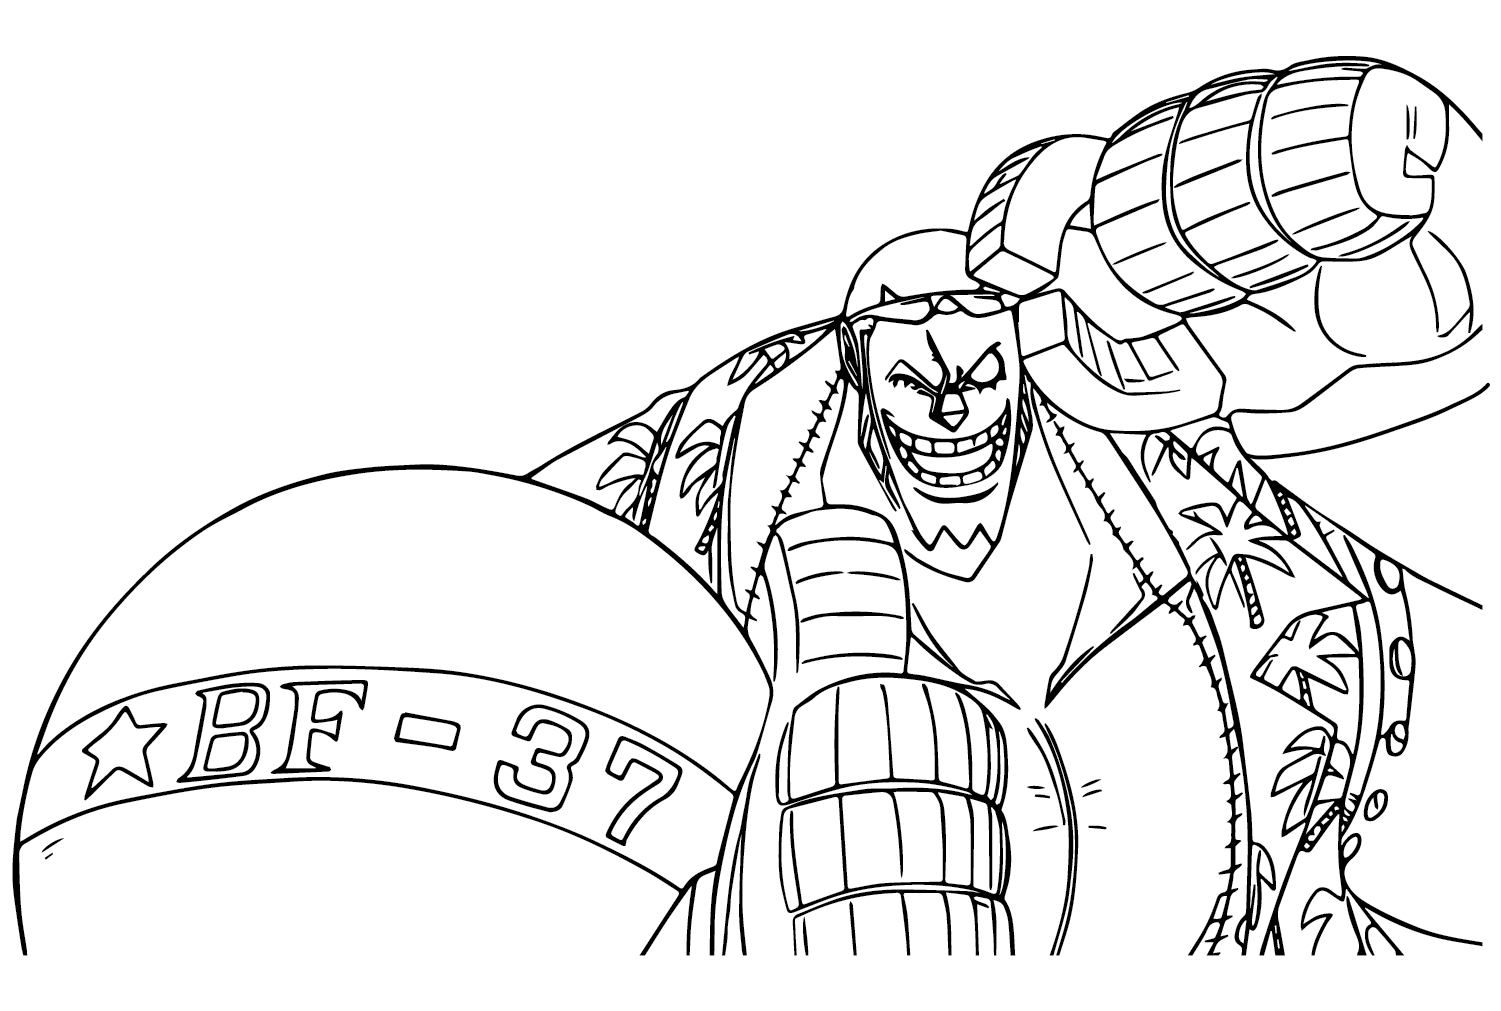 Franky Coloring Page to Print from Franky